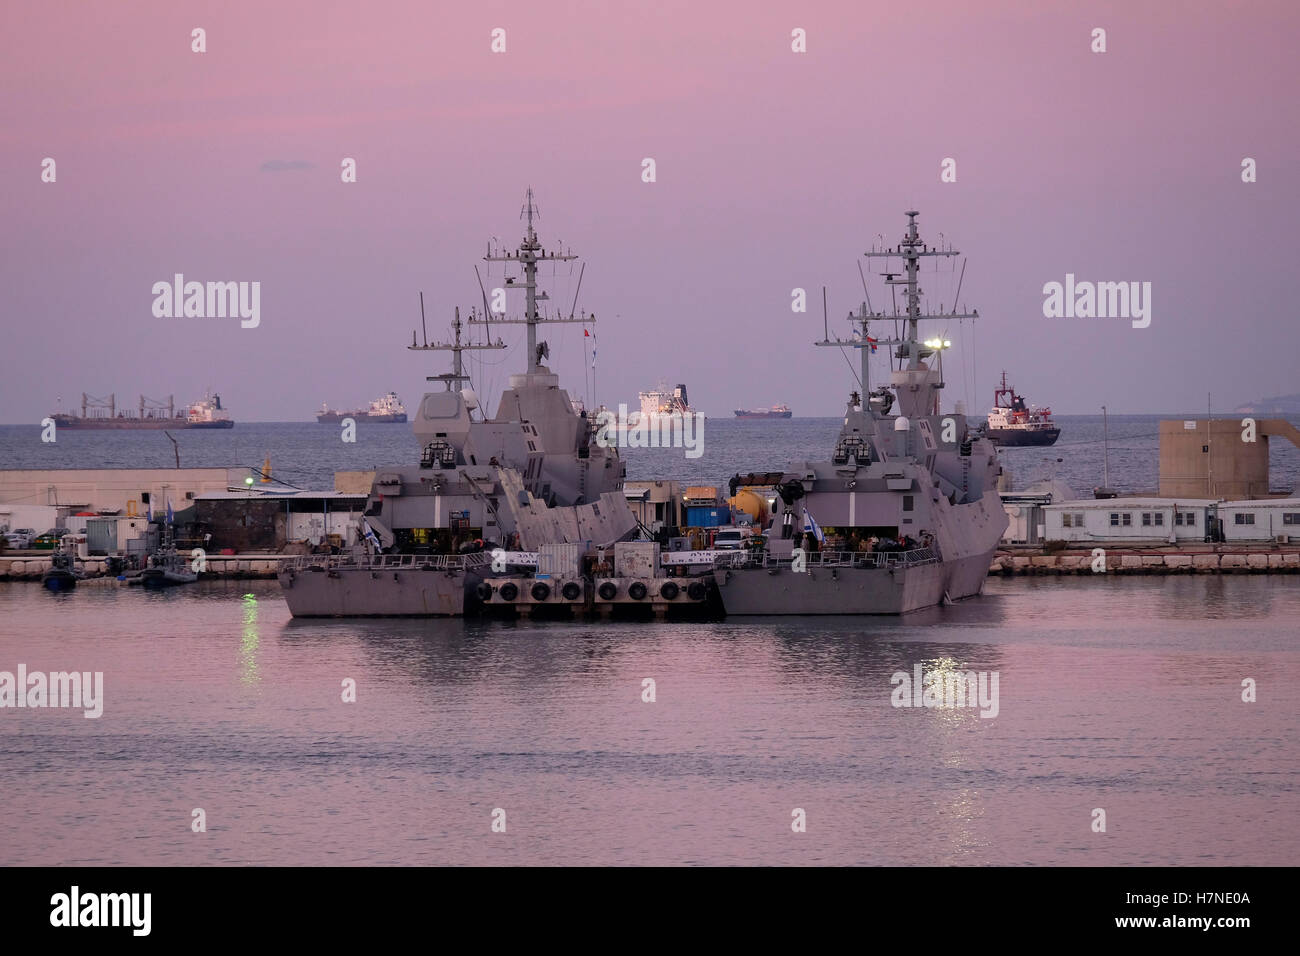 Sa'ar 5 class missile сorvettes of the Israeli Navy anchored at the Port of Haifa Israel's largest seaport. Israel Stock Photo